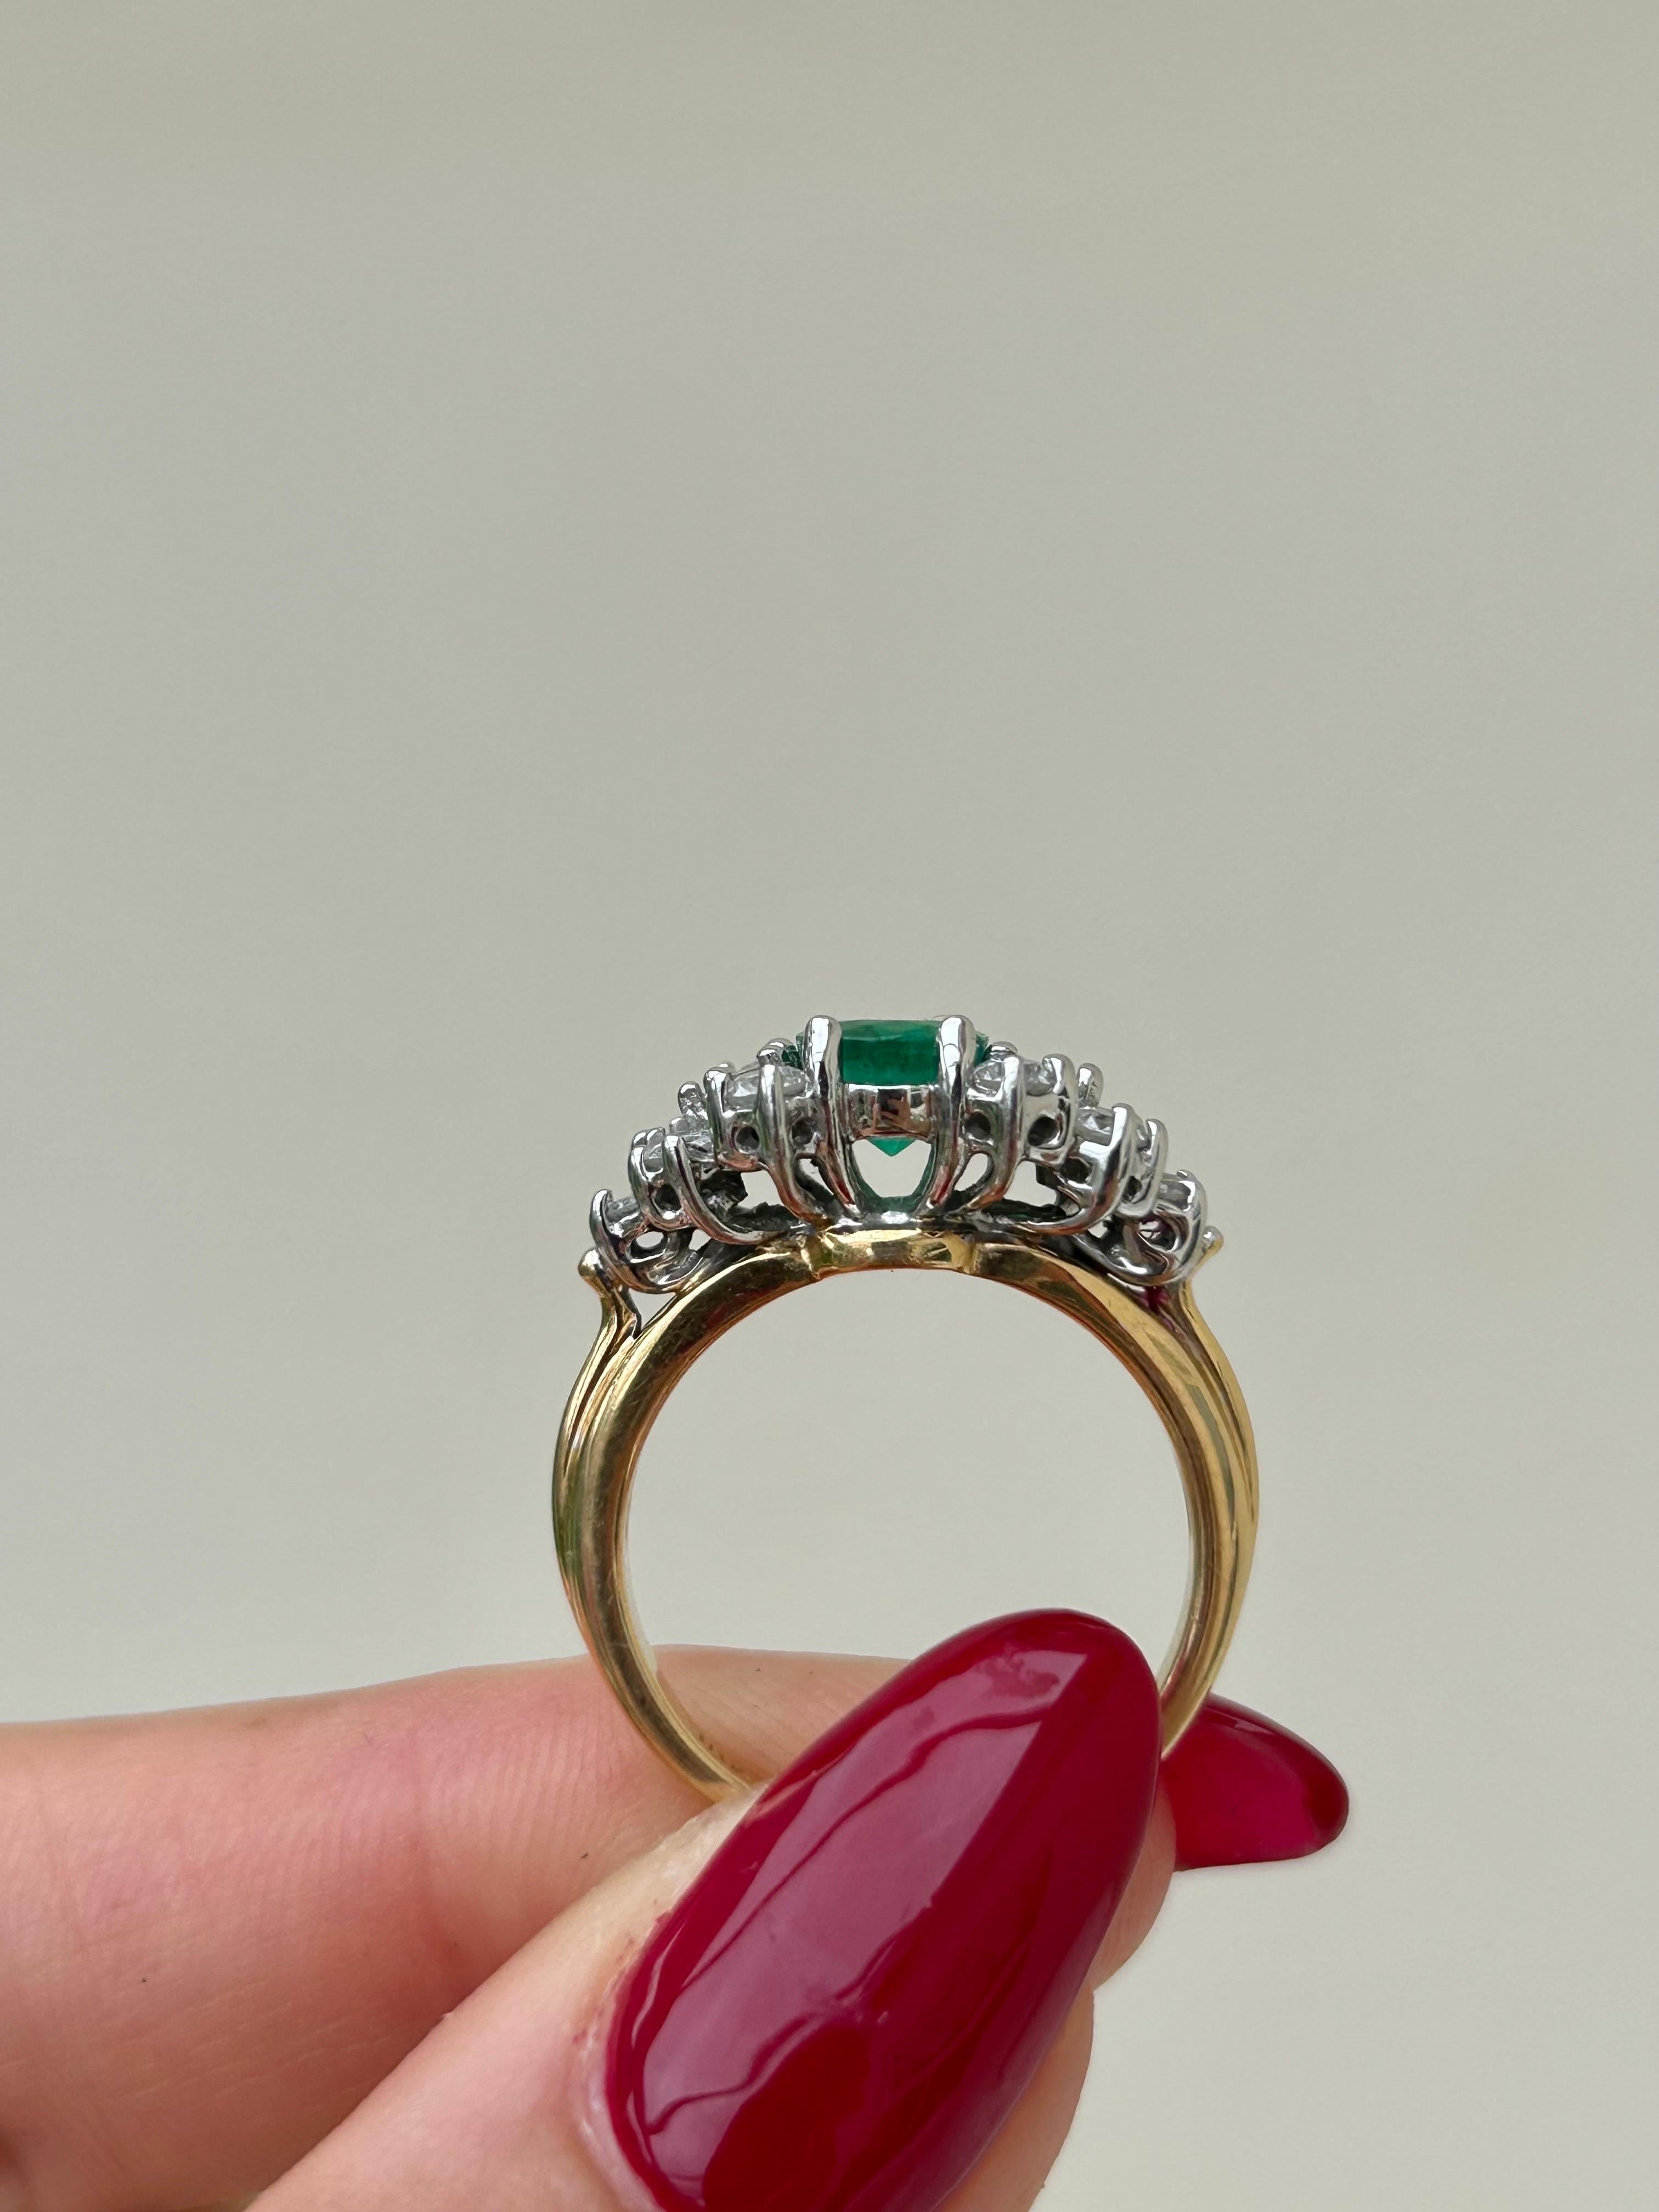 Vintage 18ct Yellow Gold Emerald and Diamond Statement Ring 

emeralds approx 1 carat , diamond approx 90 points 

most outstanding diamond and emerald ring, truly excellent! 

The item comes without the box in the photos but will be presented in a